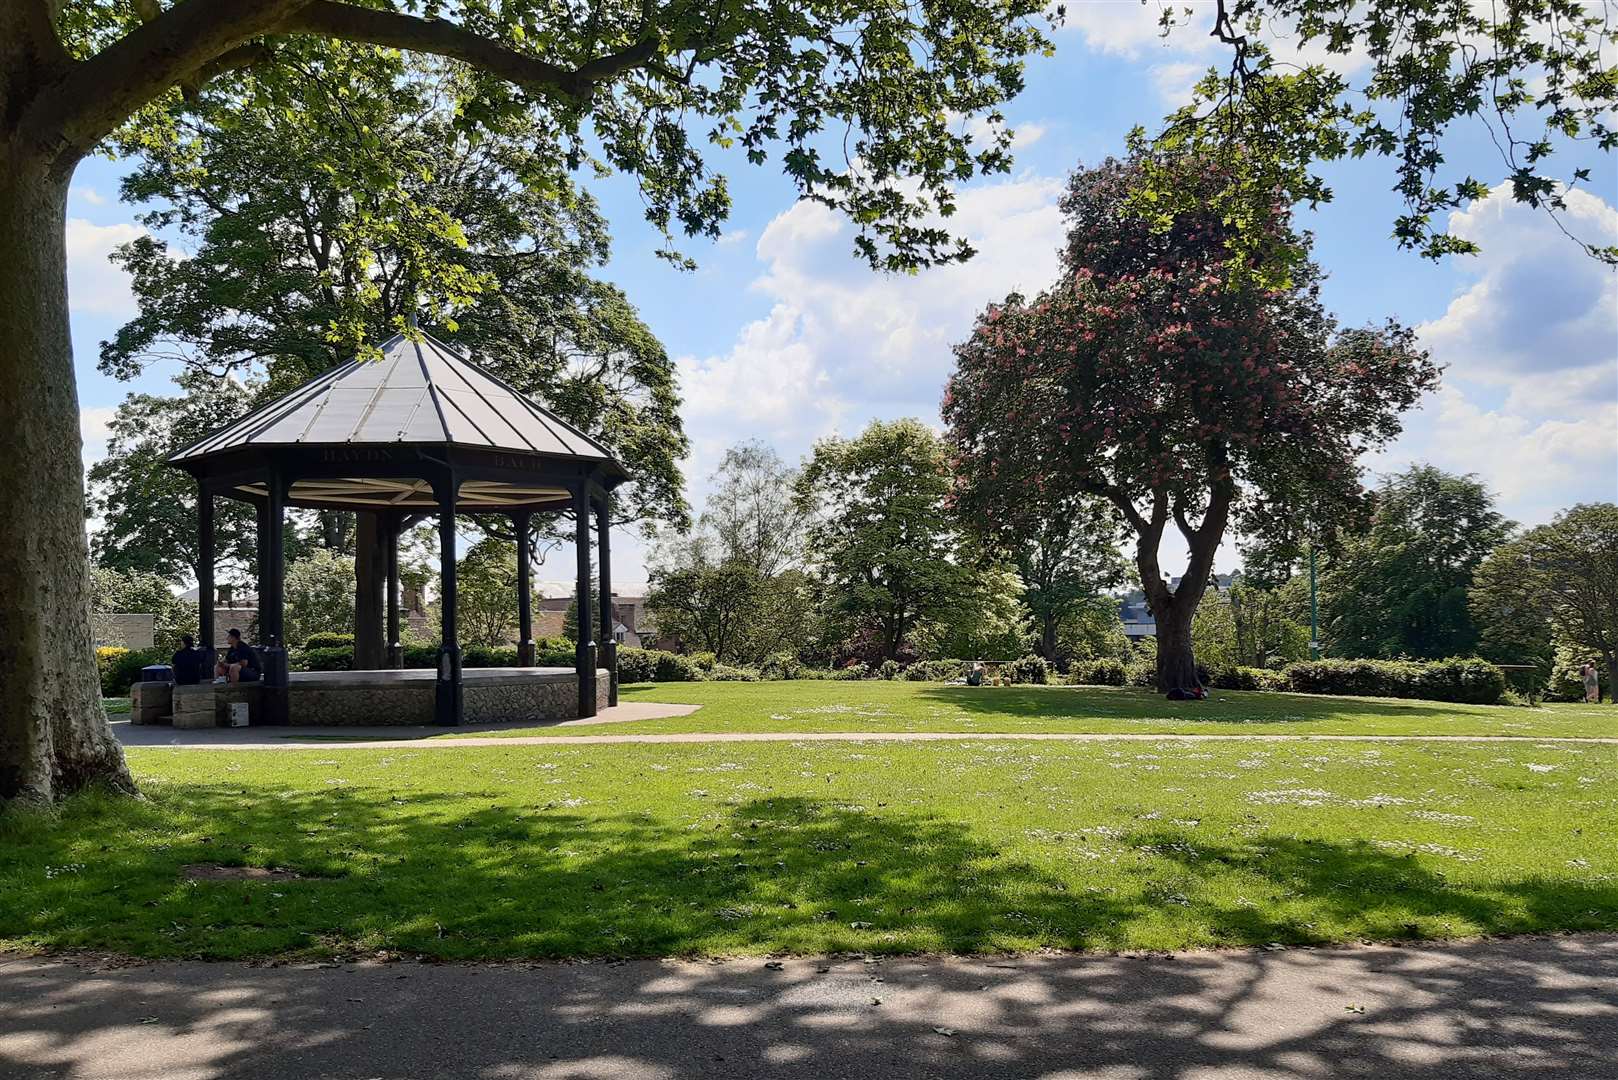 The bandstand at Brenchley Gardens